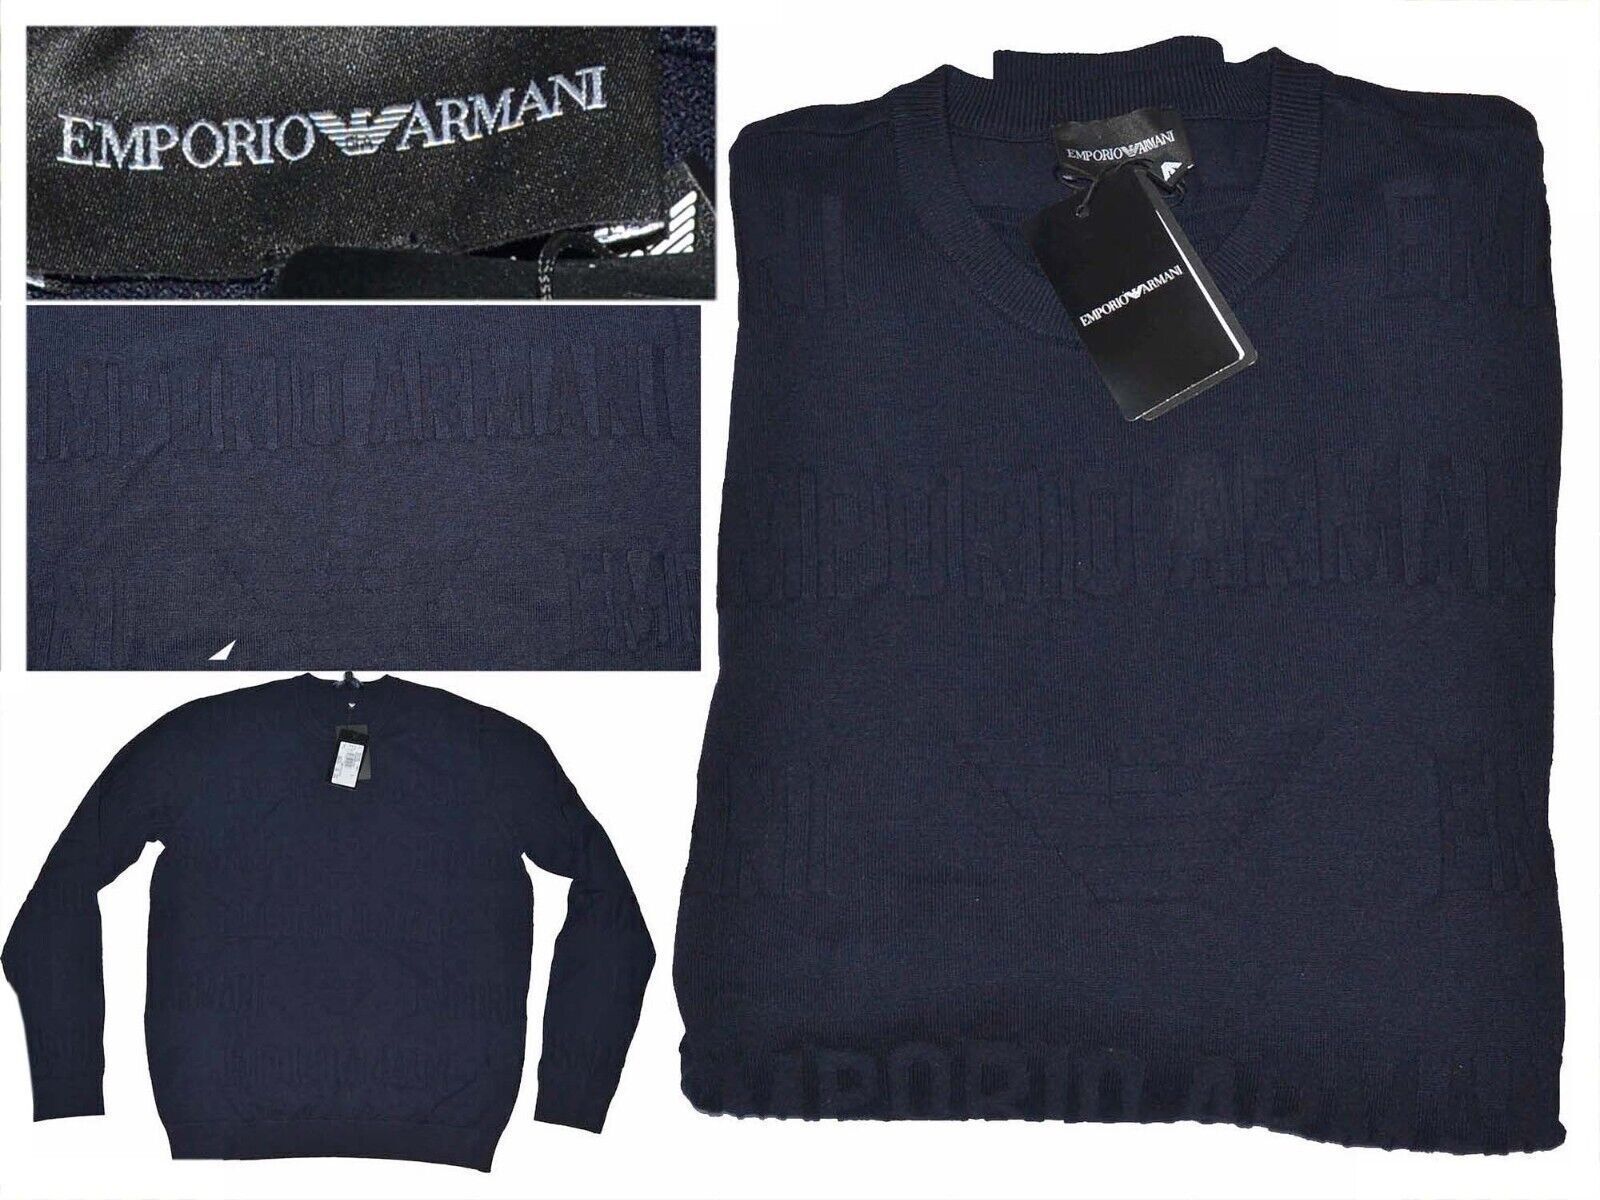 EMPORIO ARMANI Men's Jersey L *HERE WITH DISCOUNT* AR18 T1G - $115.73